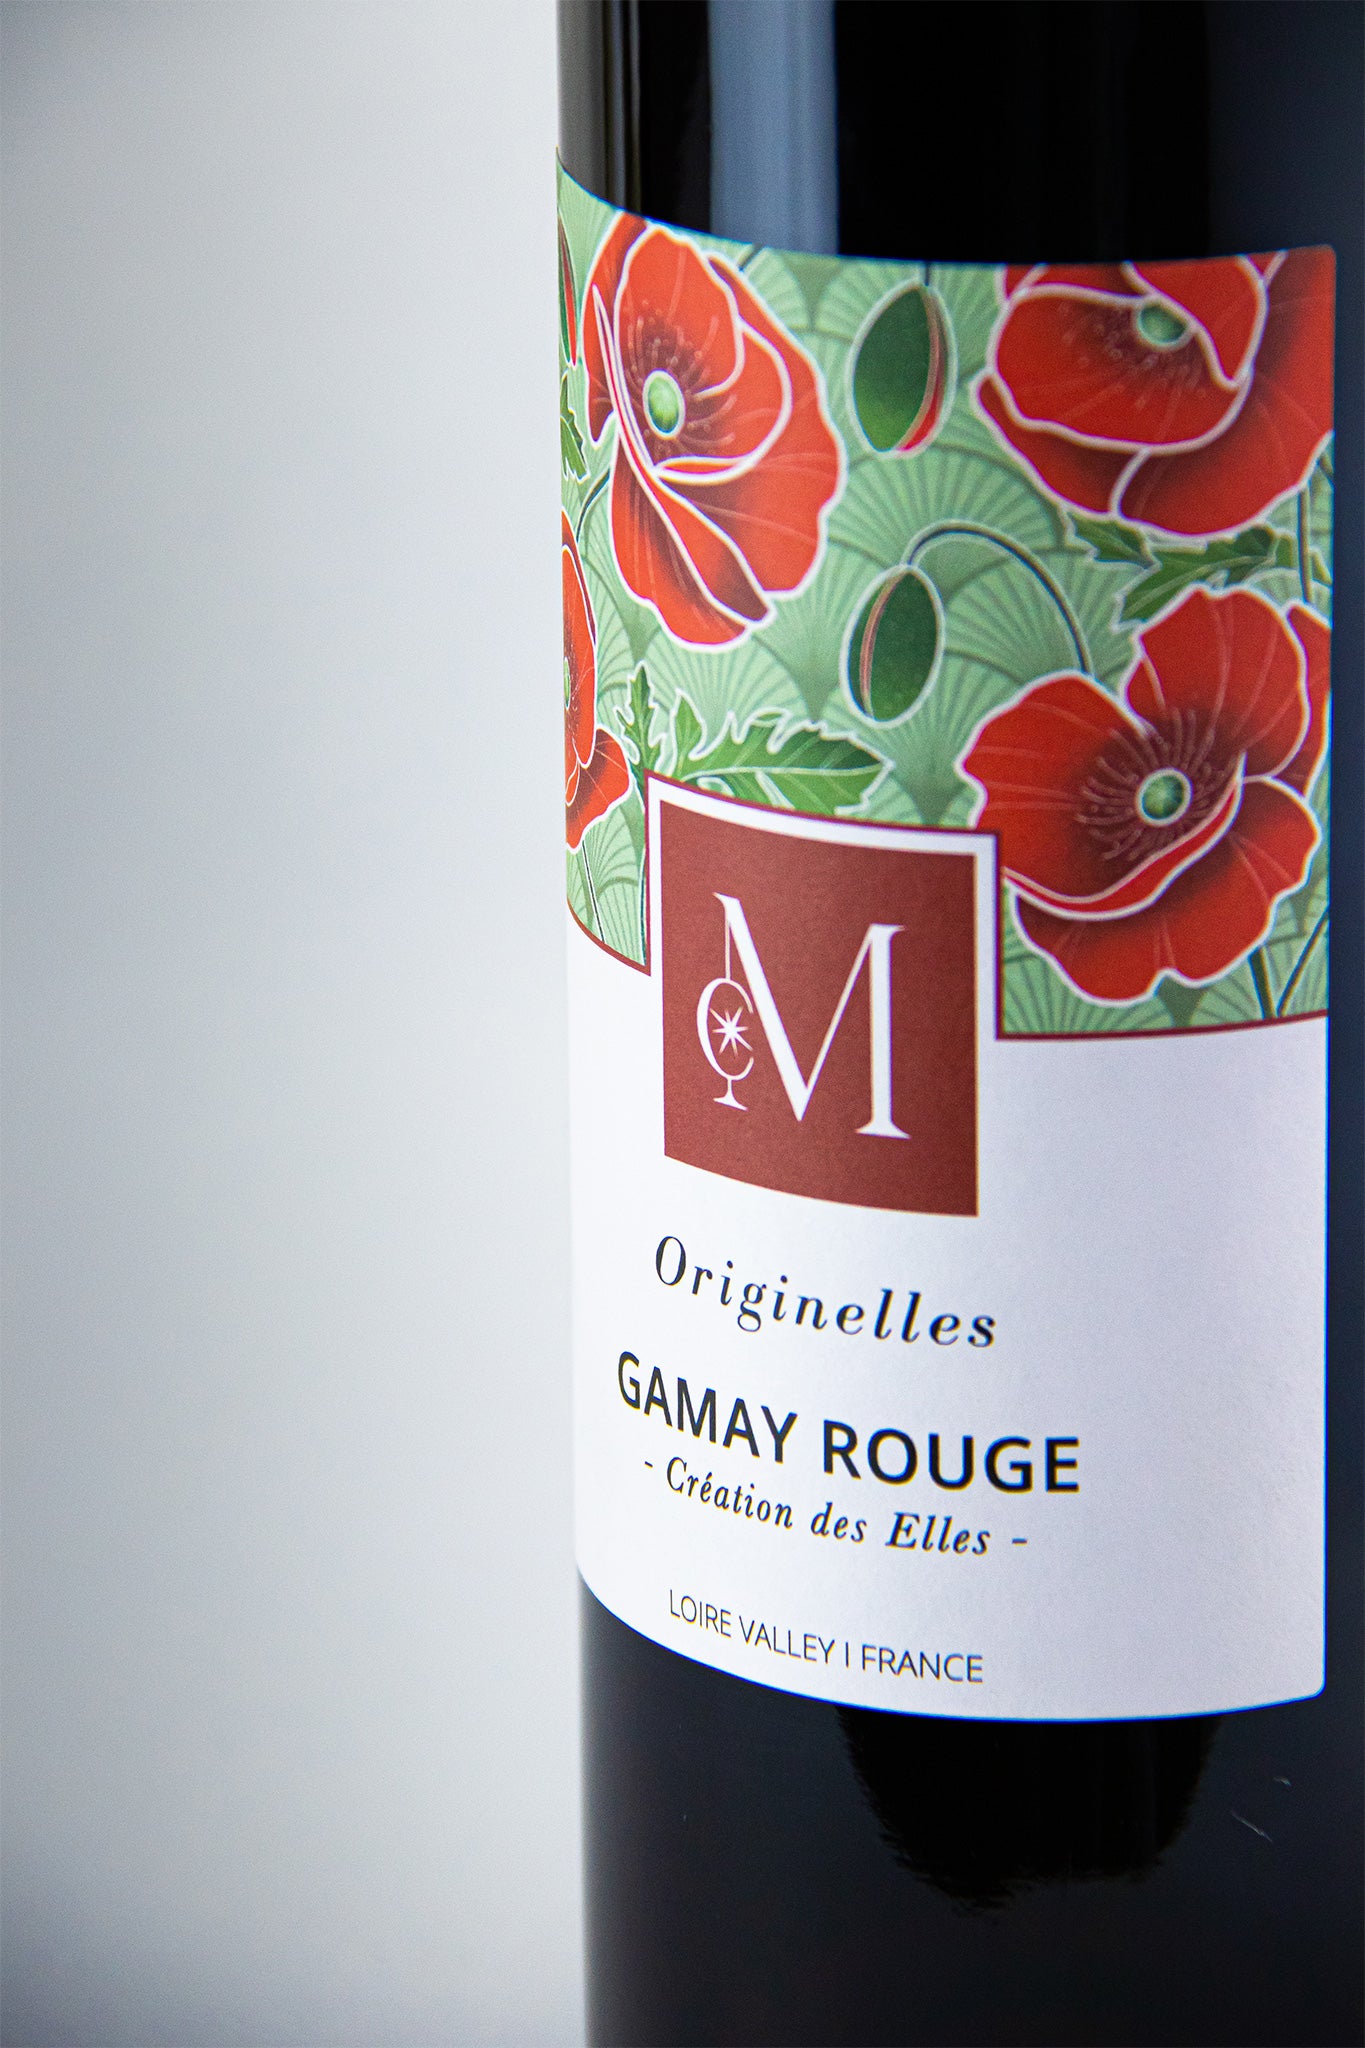 Originelles Gamay Rouge